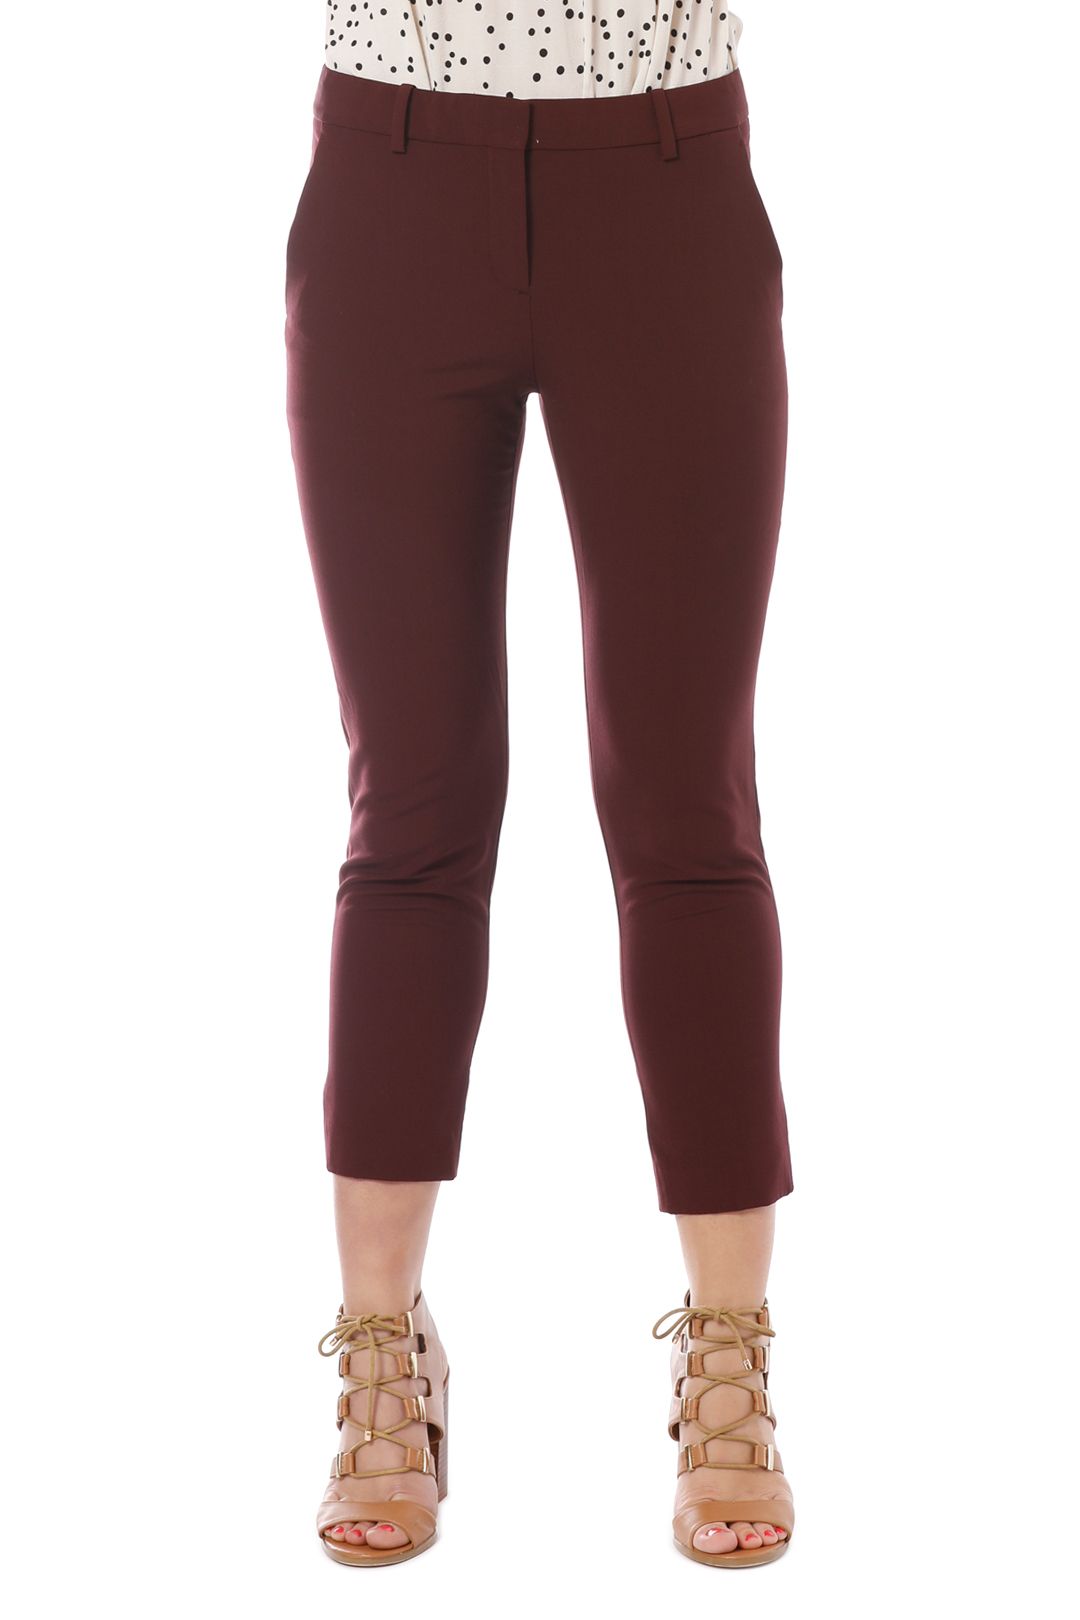 Theory - Essential Pant - Burgundy - Front Crop